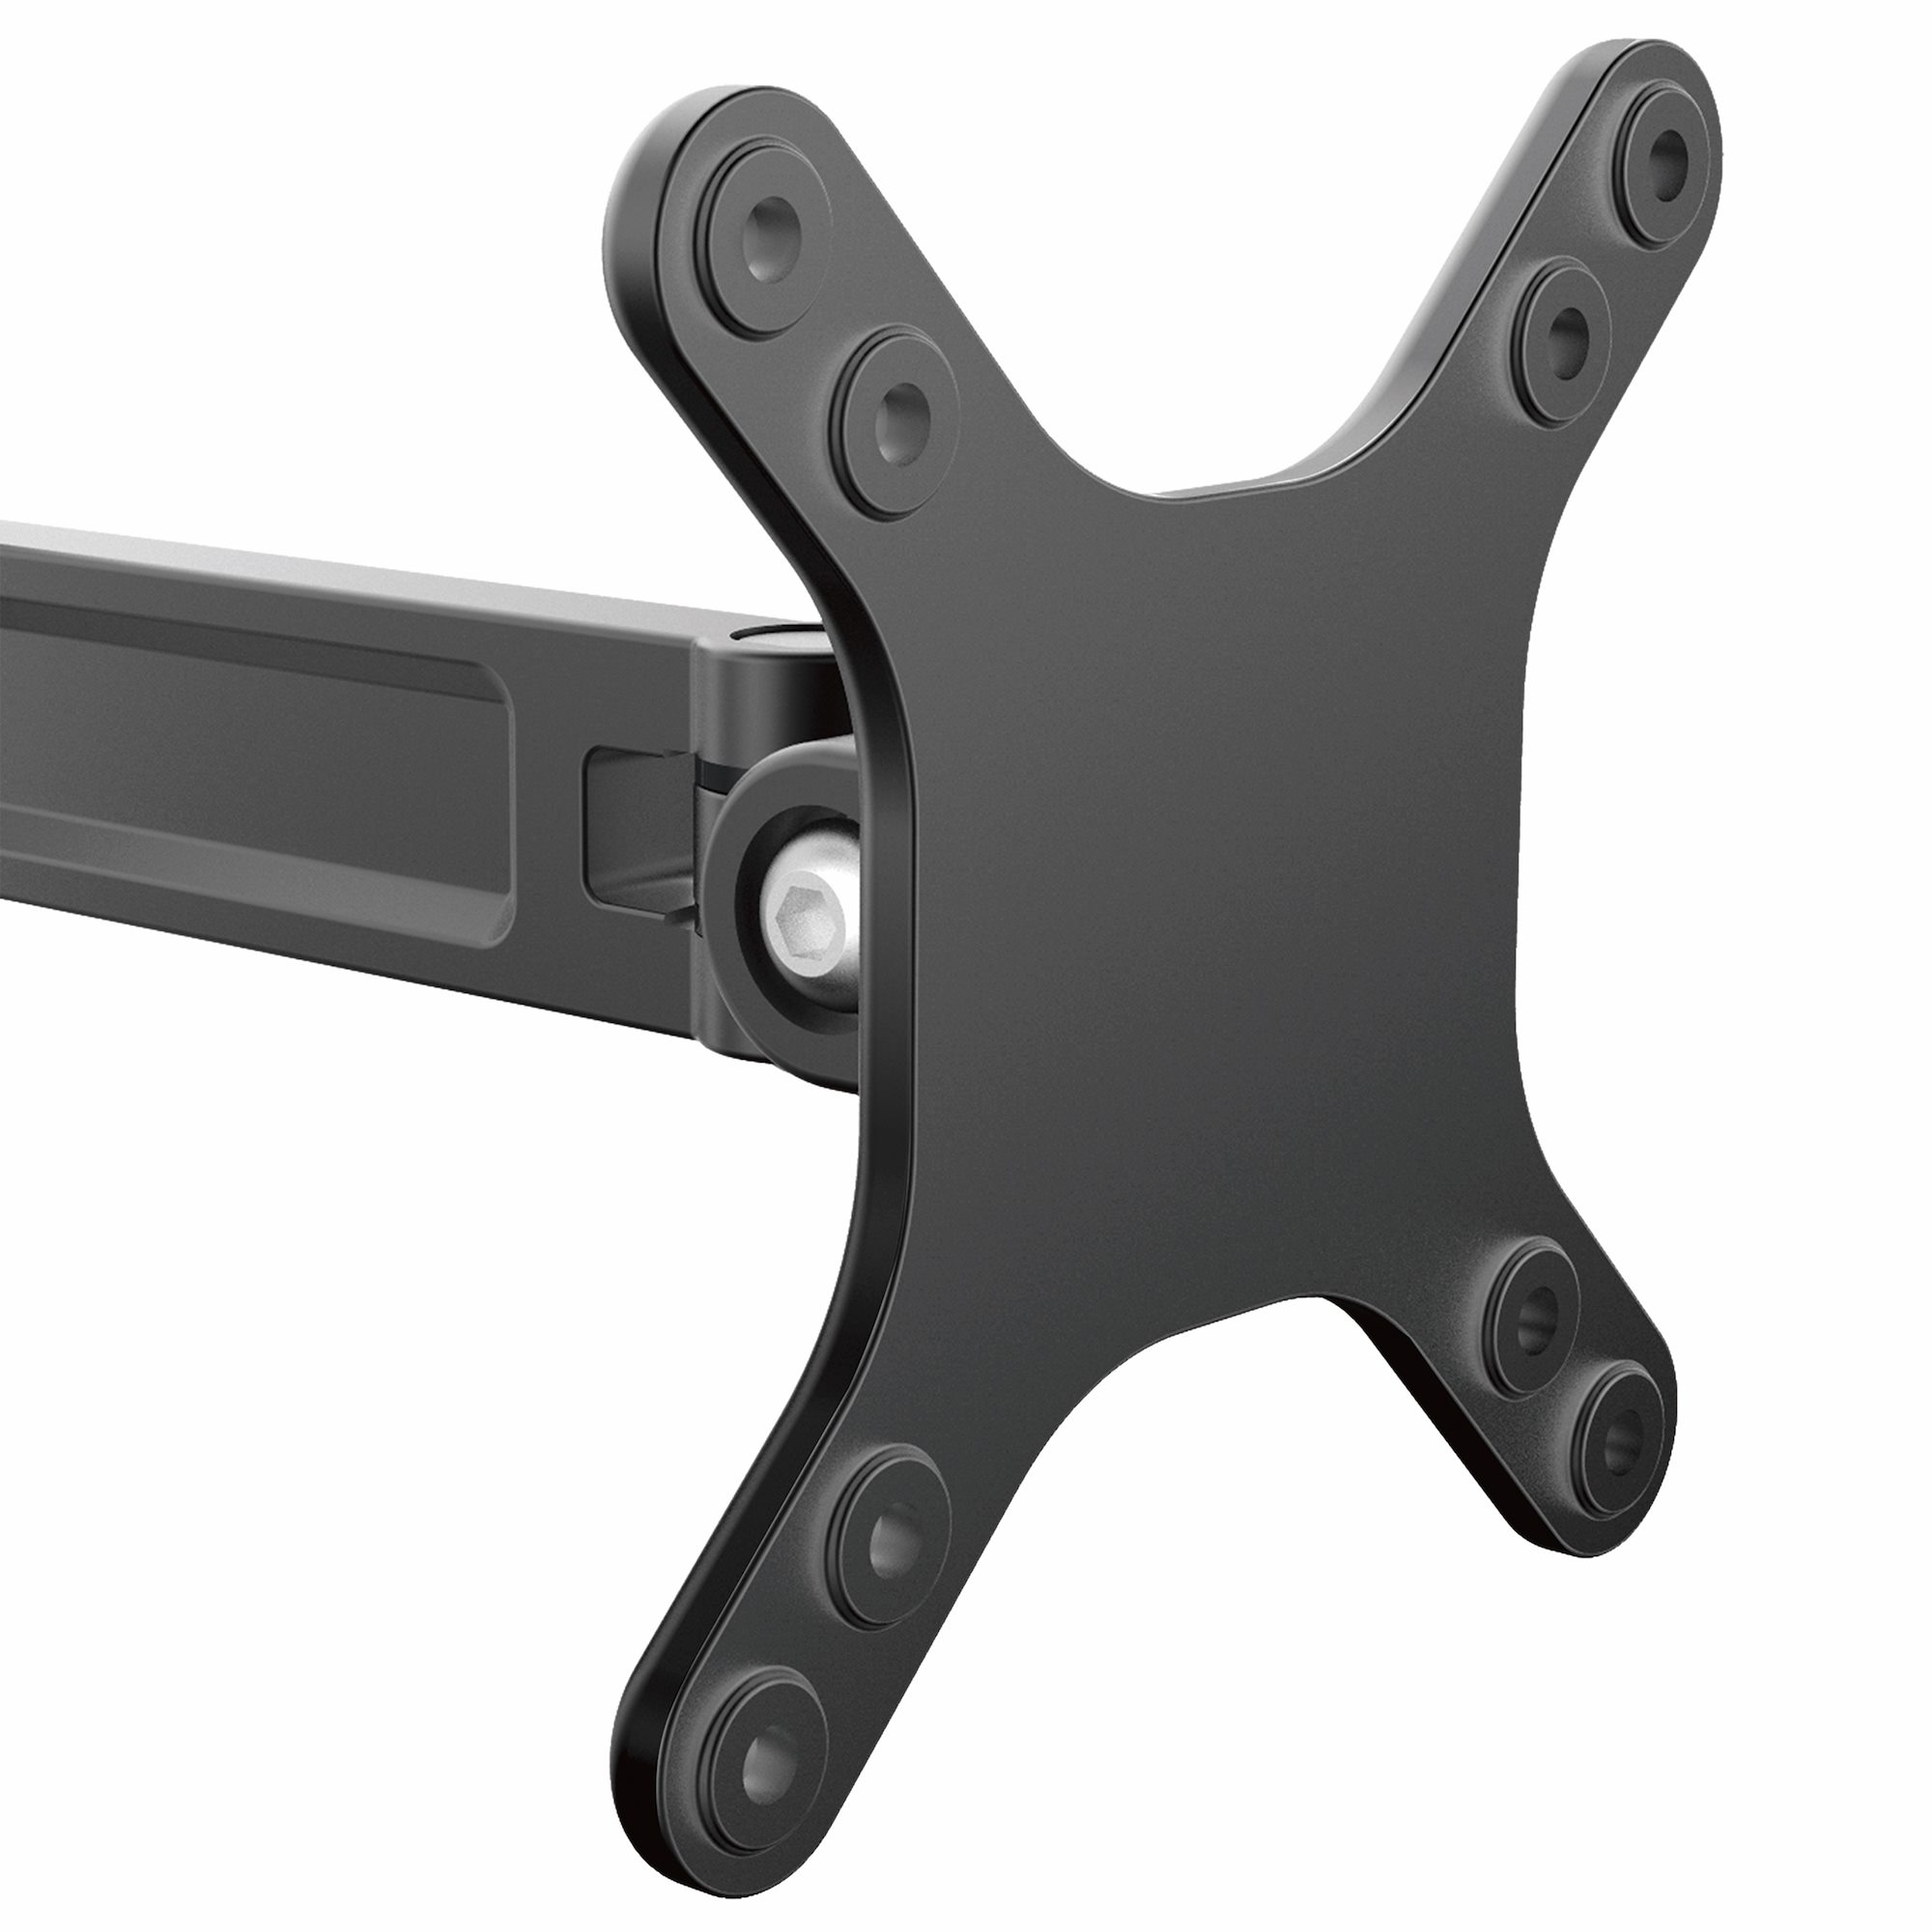 Wall-Mount Monitor Arm - Single Swivel - For up to 34 (33.1lb/15kg)  Displays